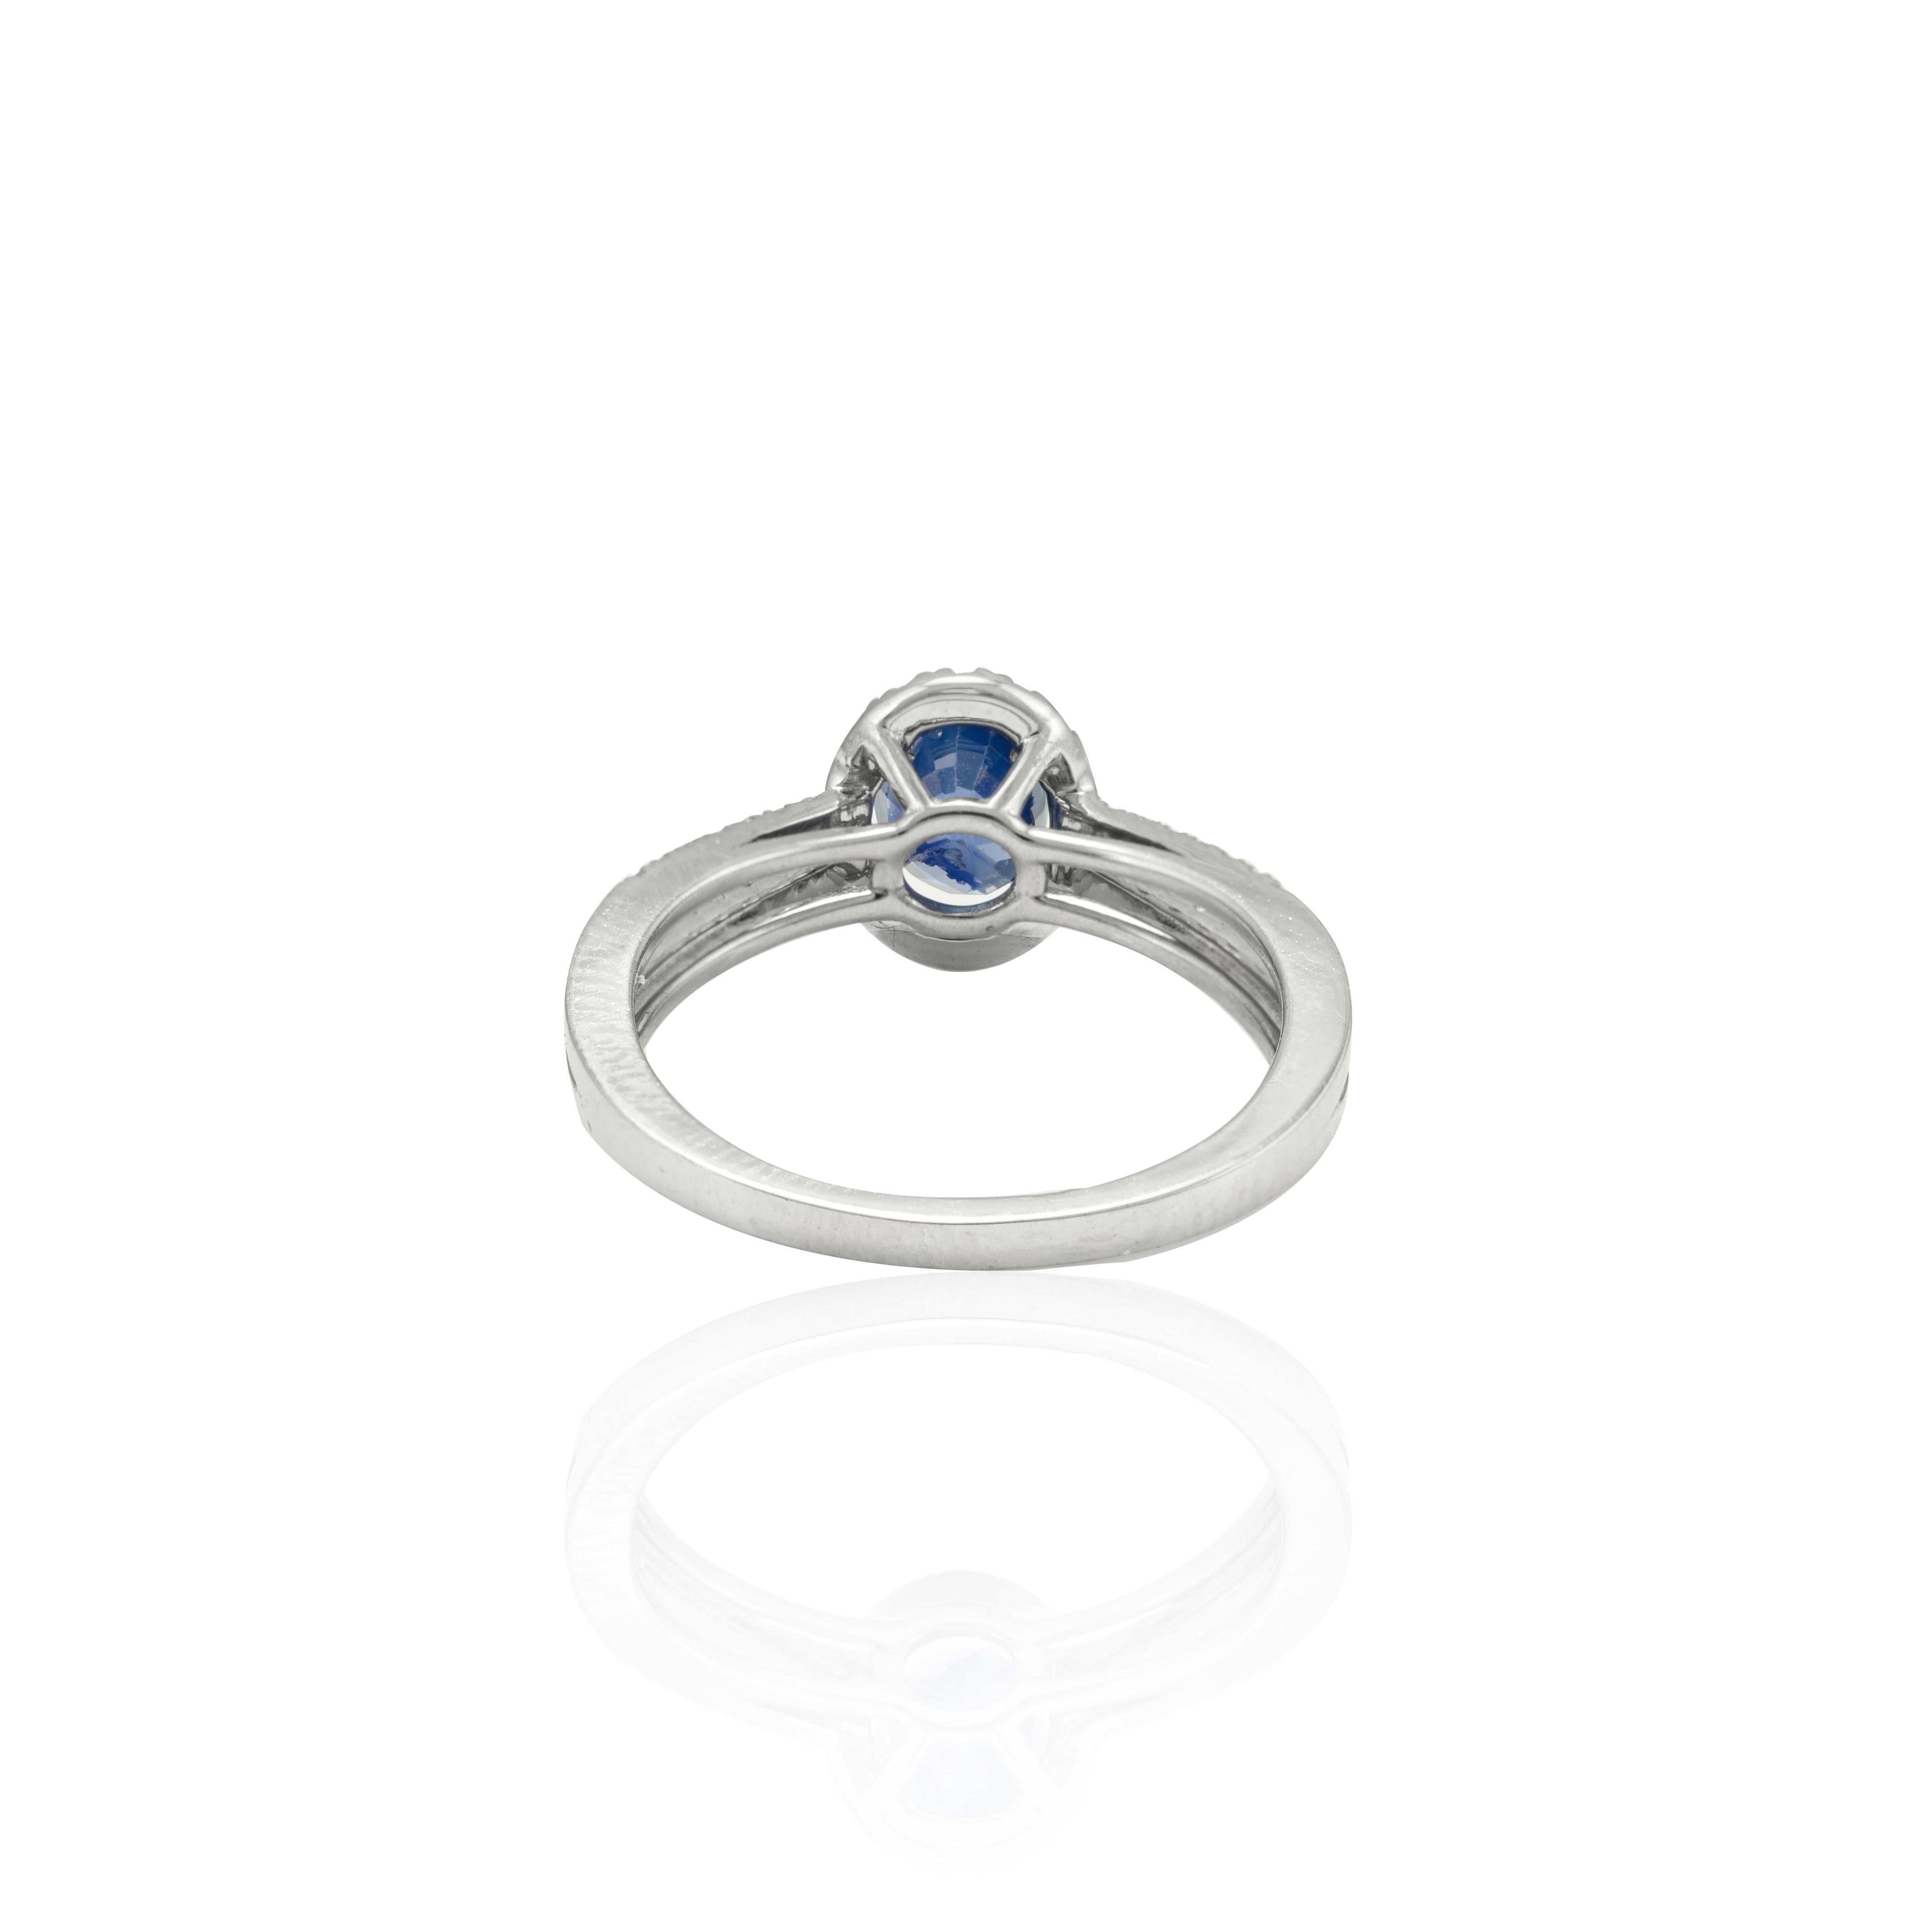 For Sale:  18k Solid White Gold Certified Blue Sapphire and Diamond Engagement Ring 7